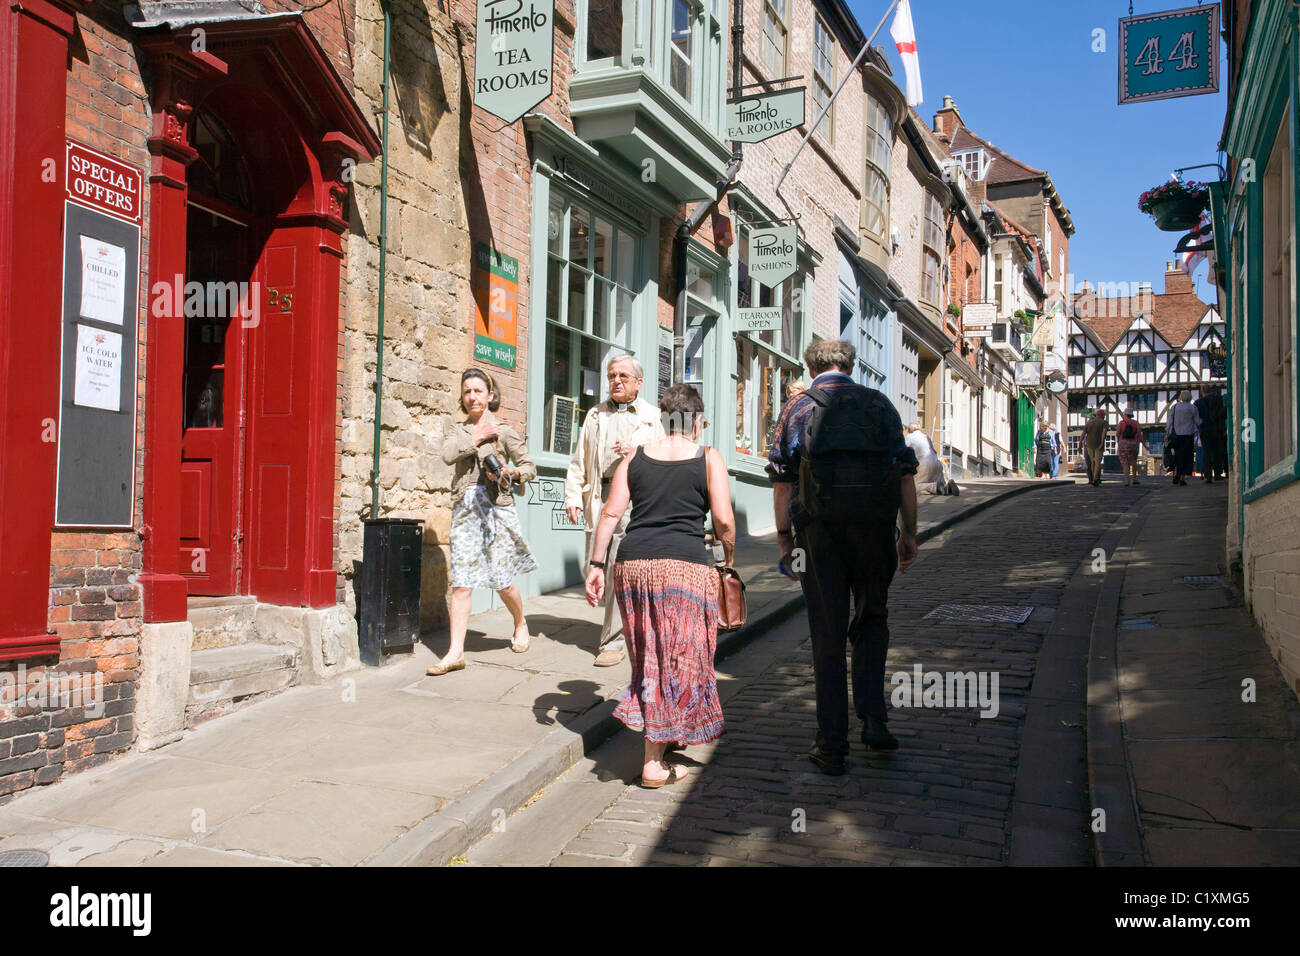 Steep Hill, Lincoln, England Stock Photo